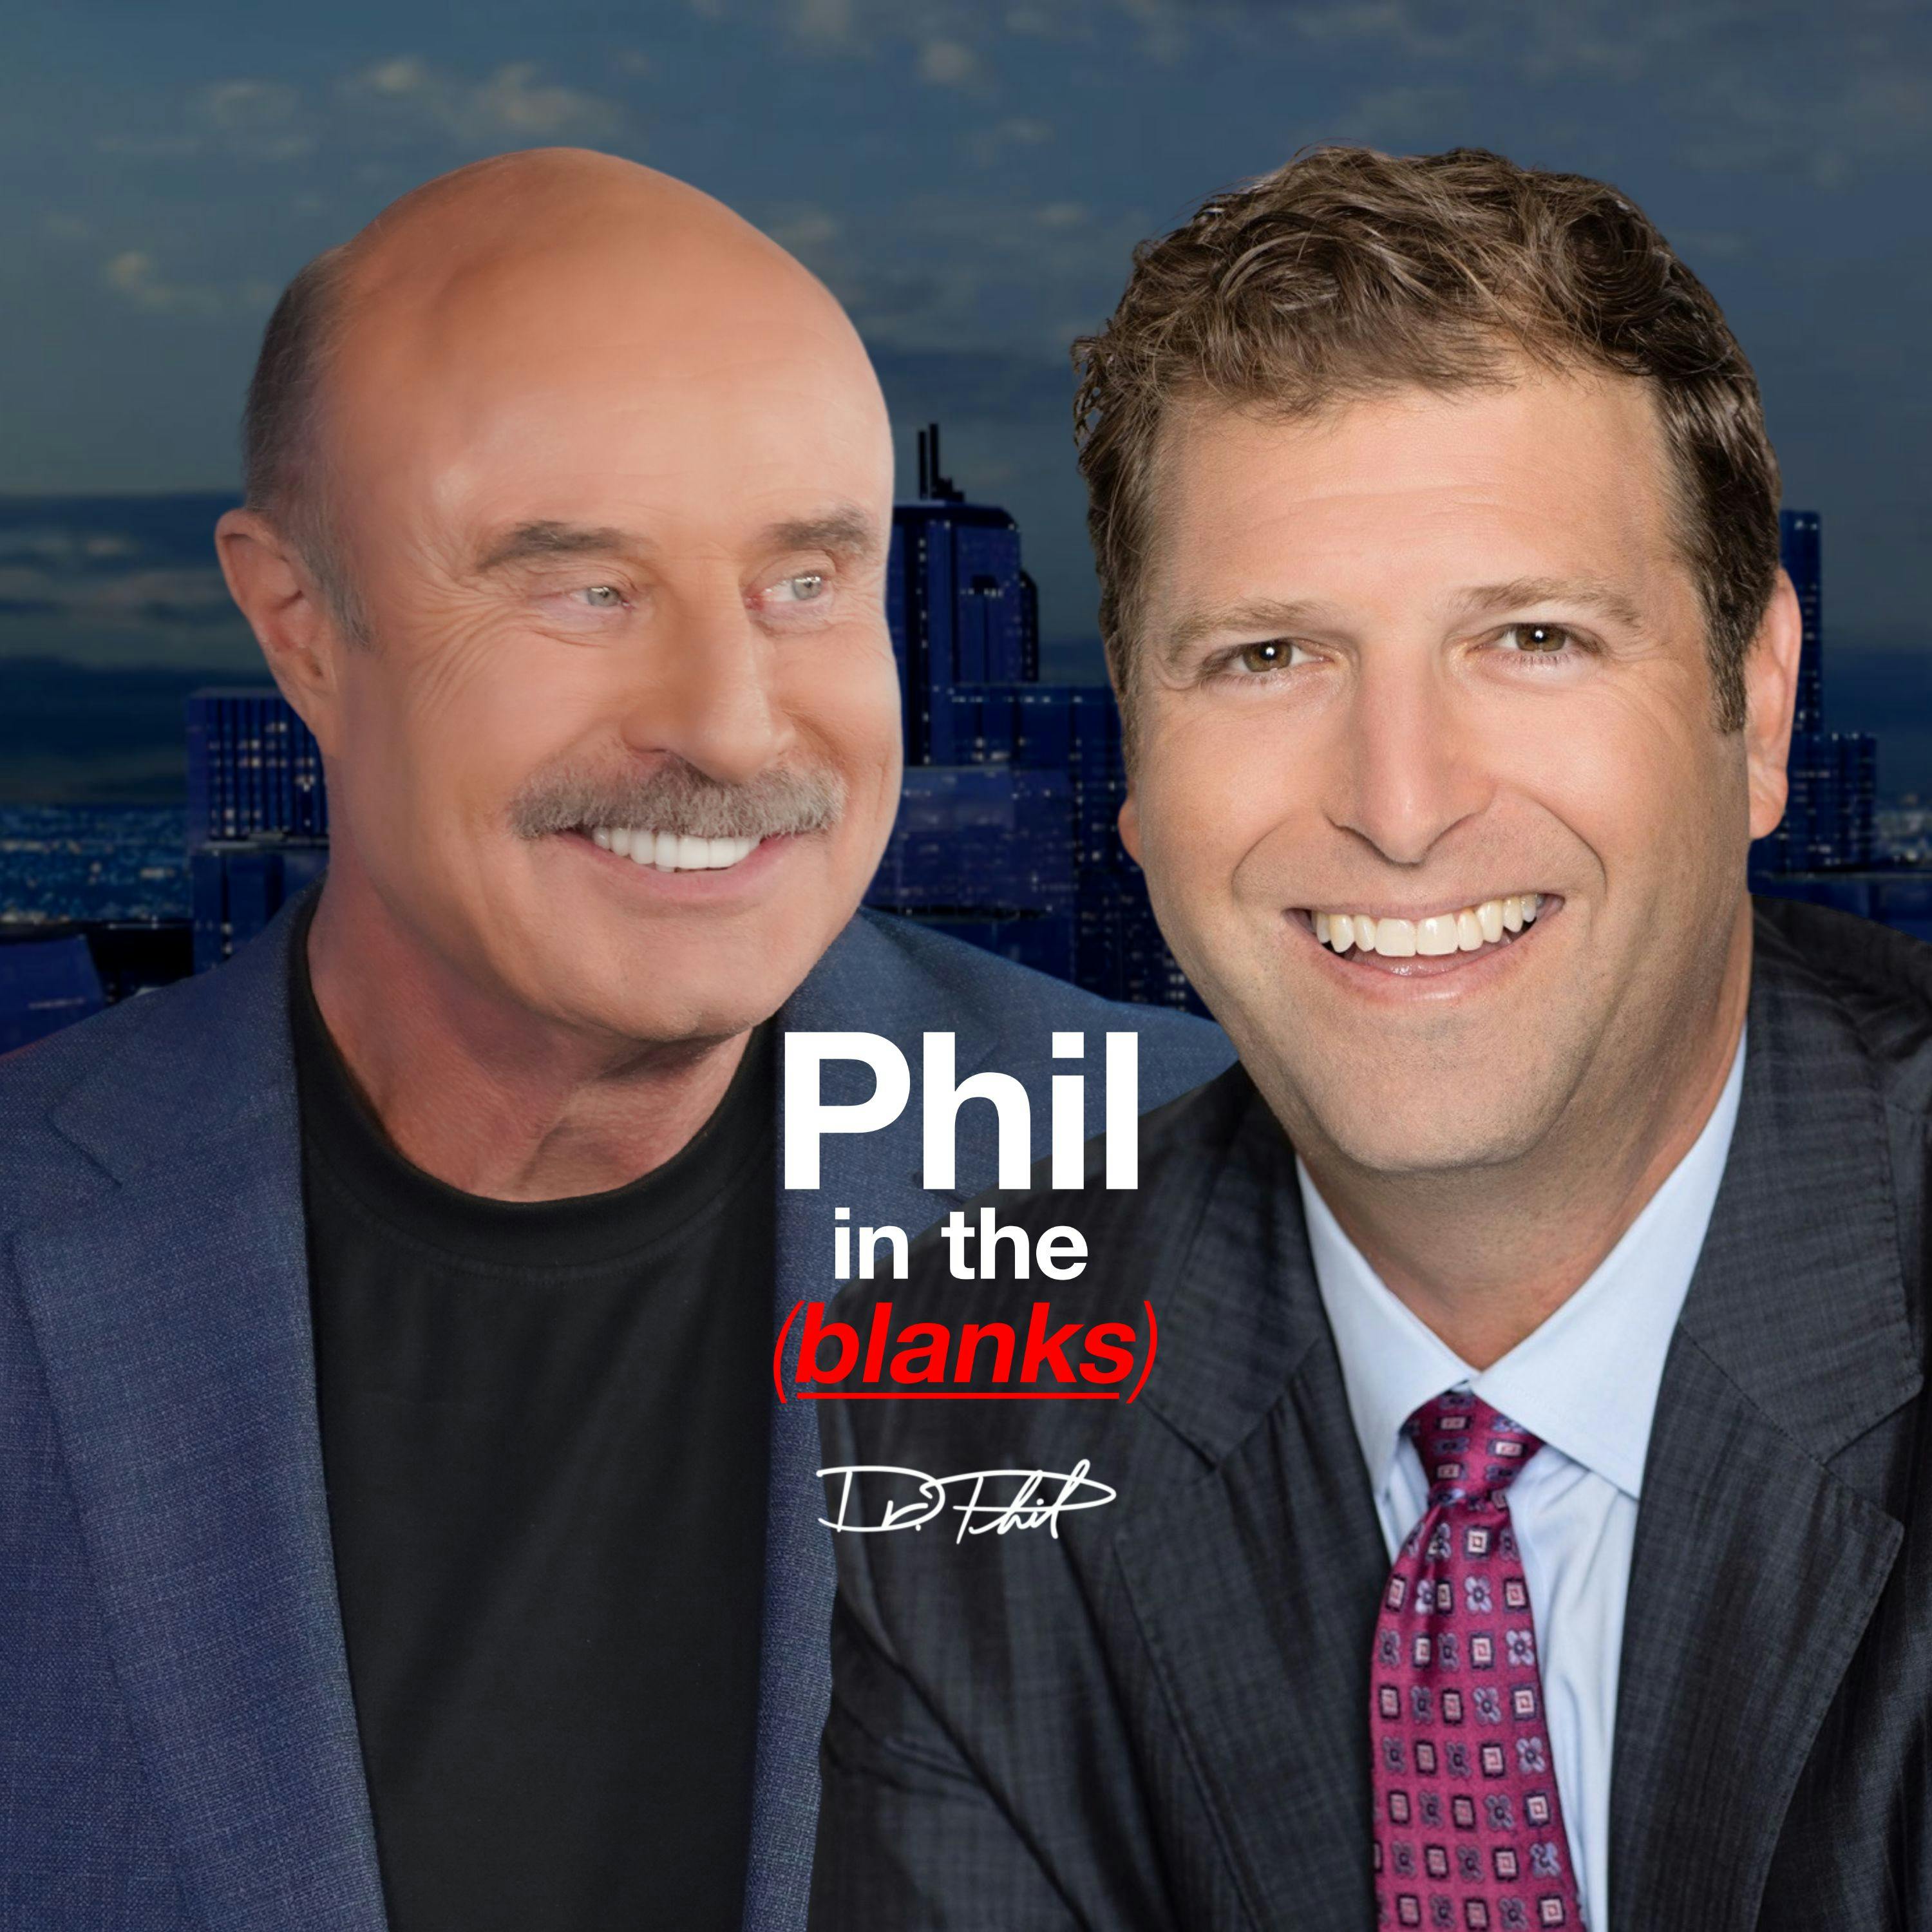 Dr. Phil Exclusive: Analysis - Eric Lynn on Iron Dome, Fighter Jets and Iran's Attack on Israel